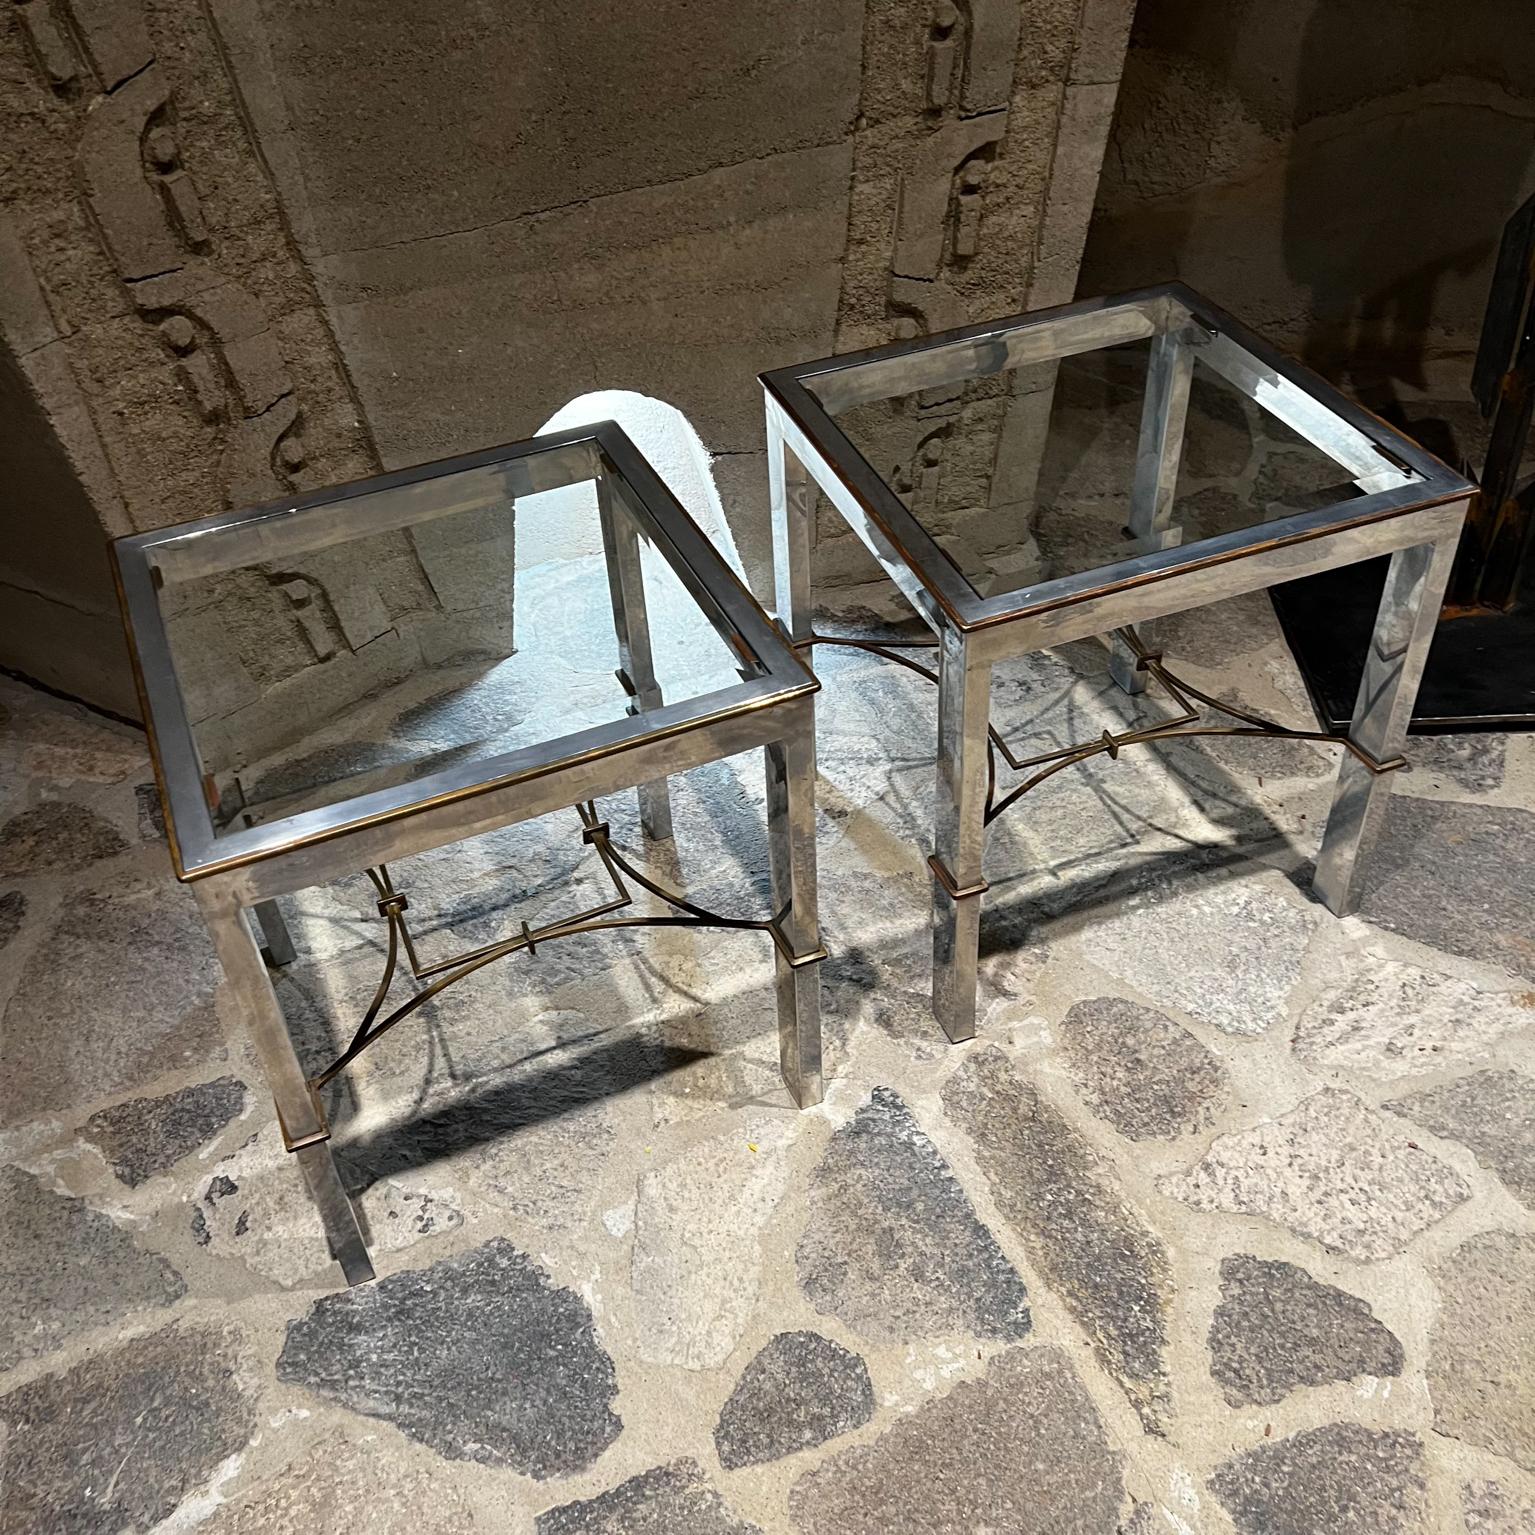 Mid-20th Century 1960s Arturo Pani Modern Side Tables Aluminum and Bronze Mexico City For Sale